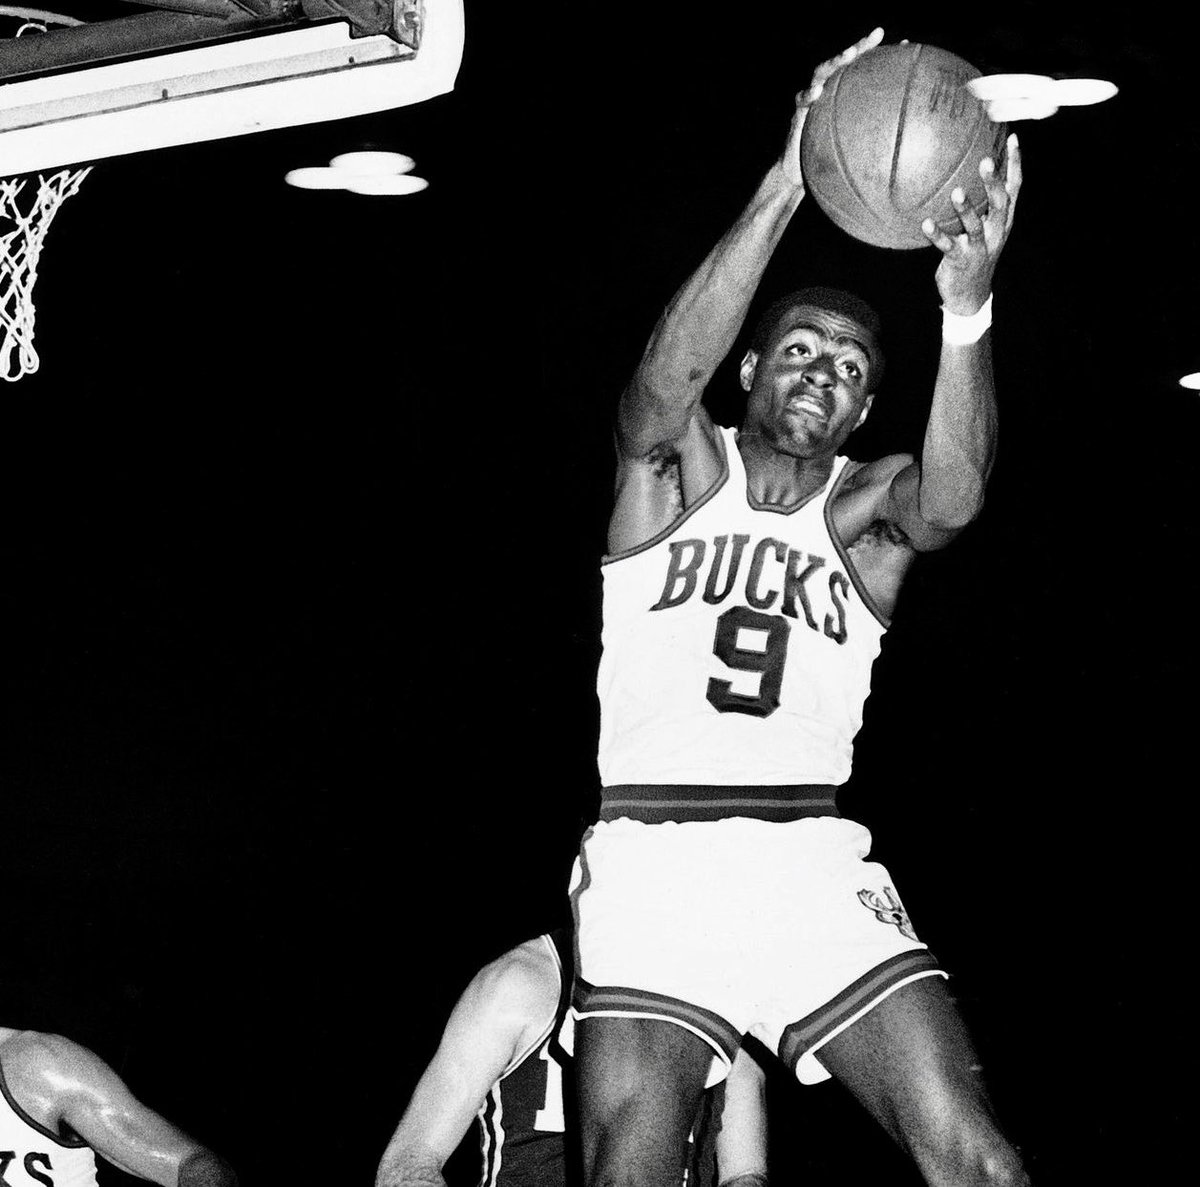 Bob Love played 14 games with Milwaukee in 1968 before being traded to Chicago, where he spent seven full seasons.He played 13 games with the New York Nets after the Bulls traded him away in 1976.